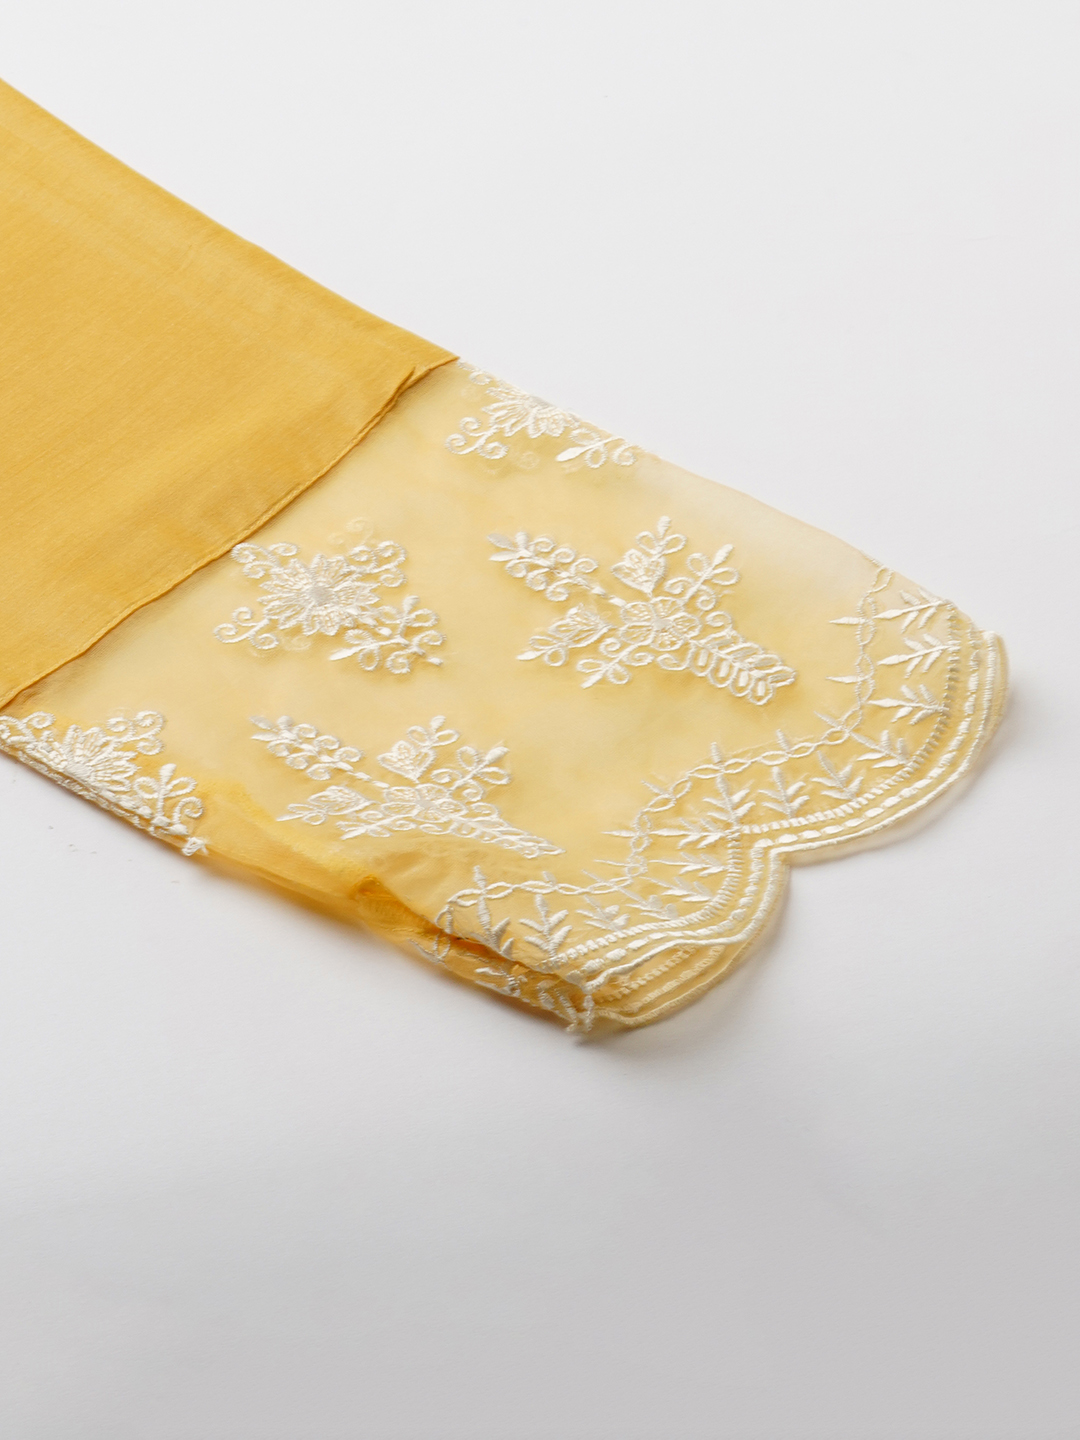 Globus Women Yellow Embroidered A-Line Kurta With Pants